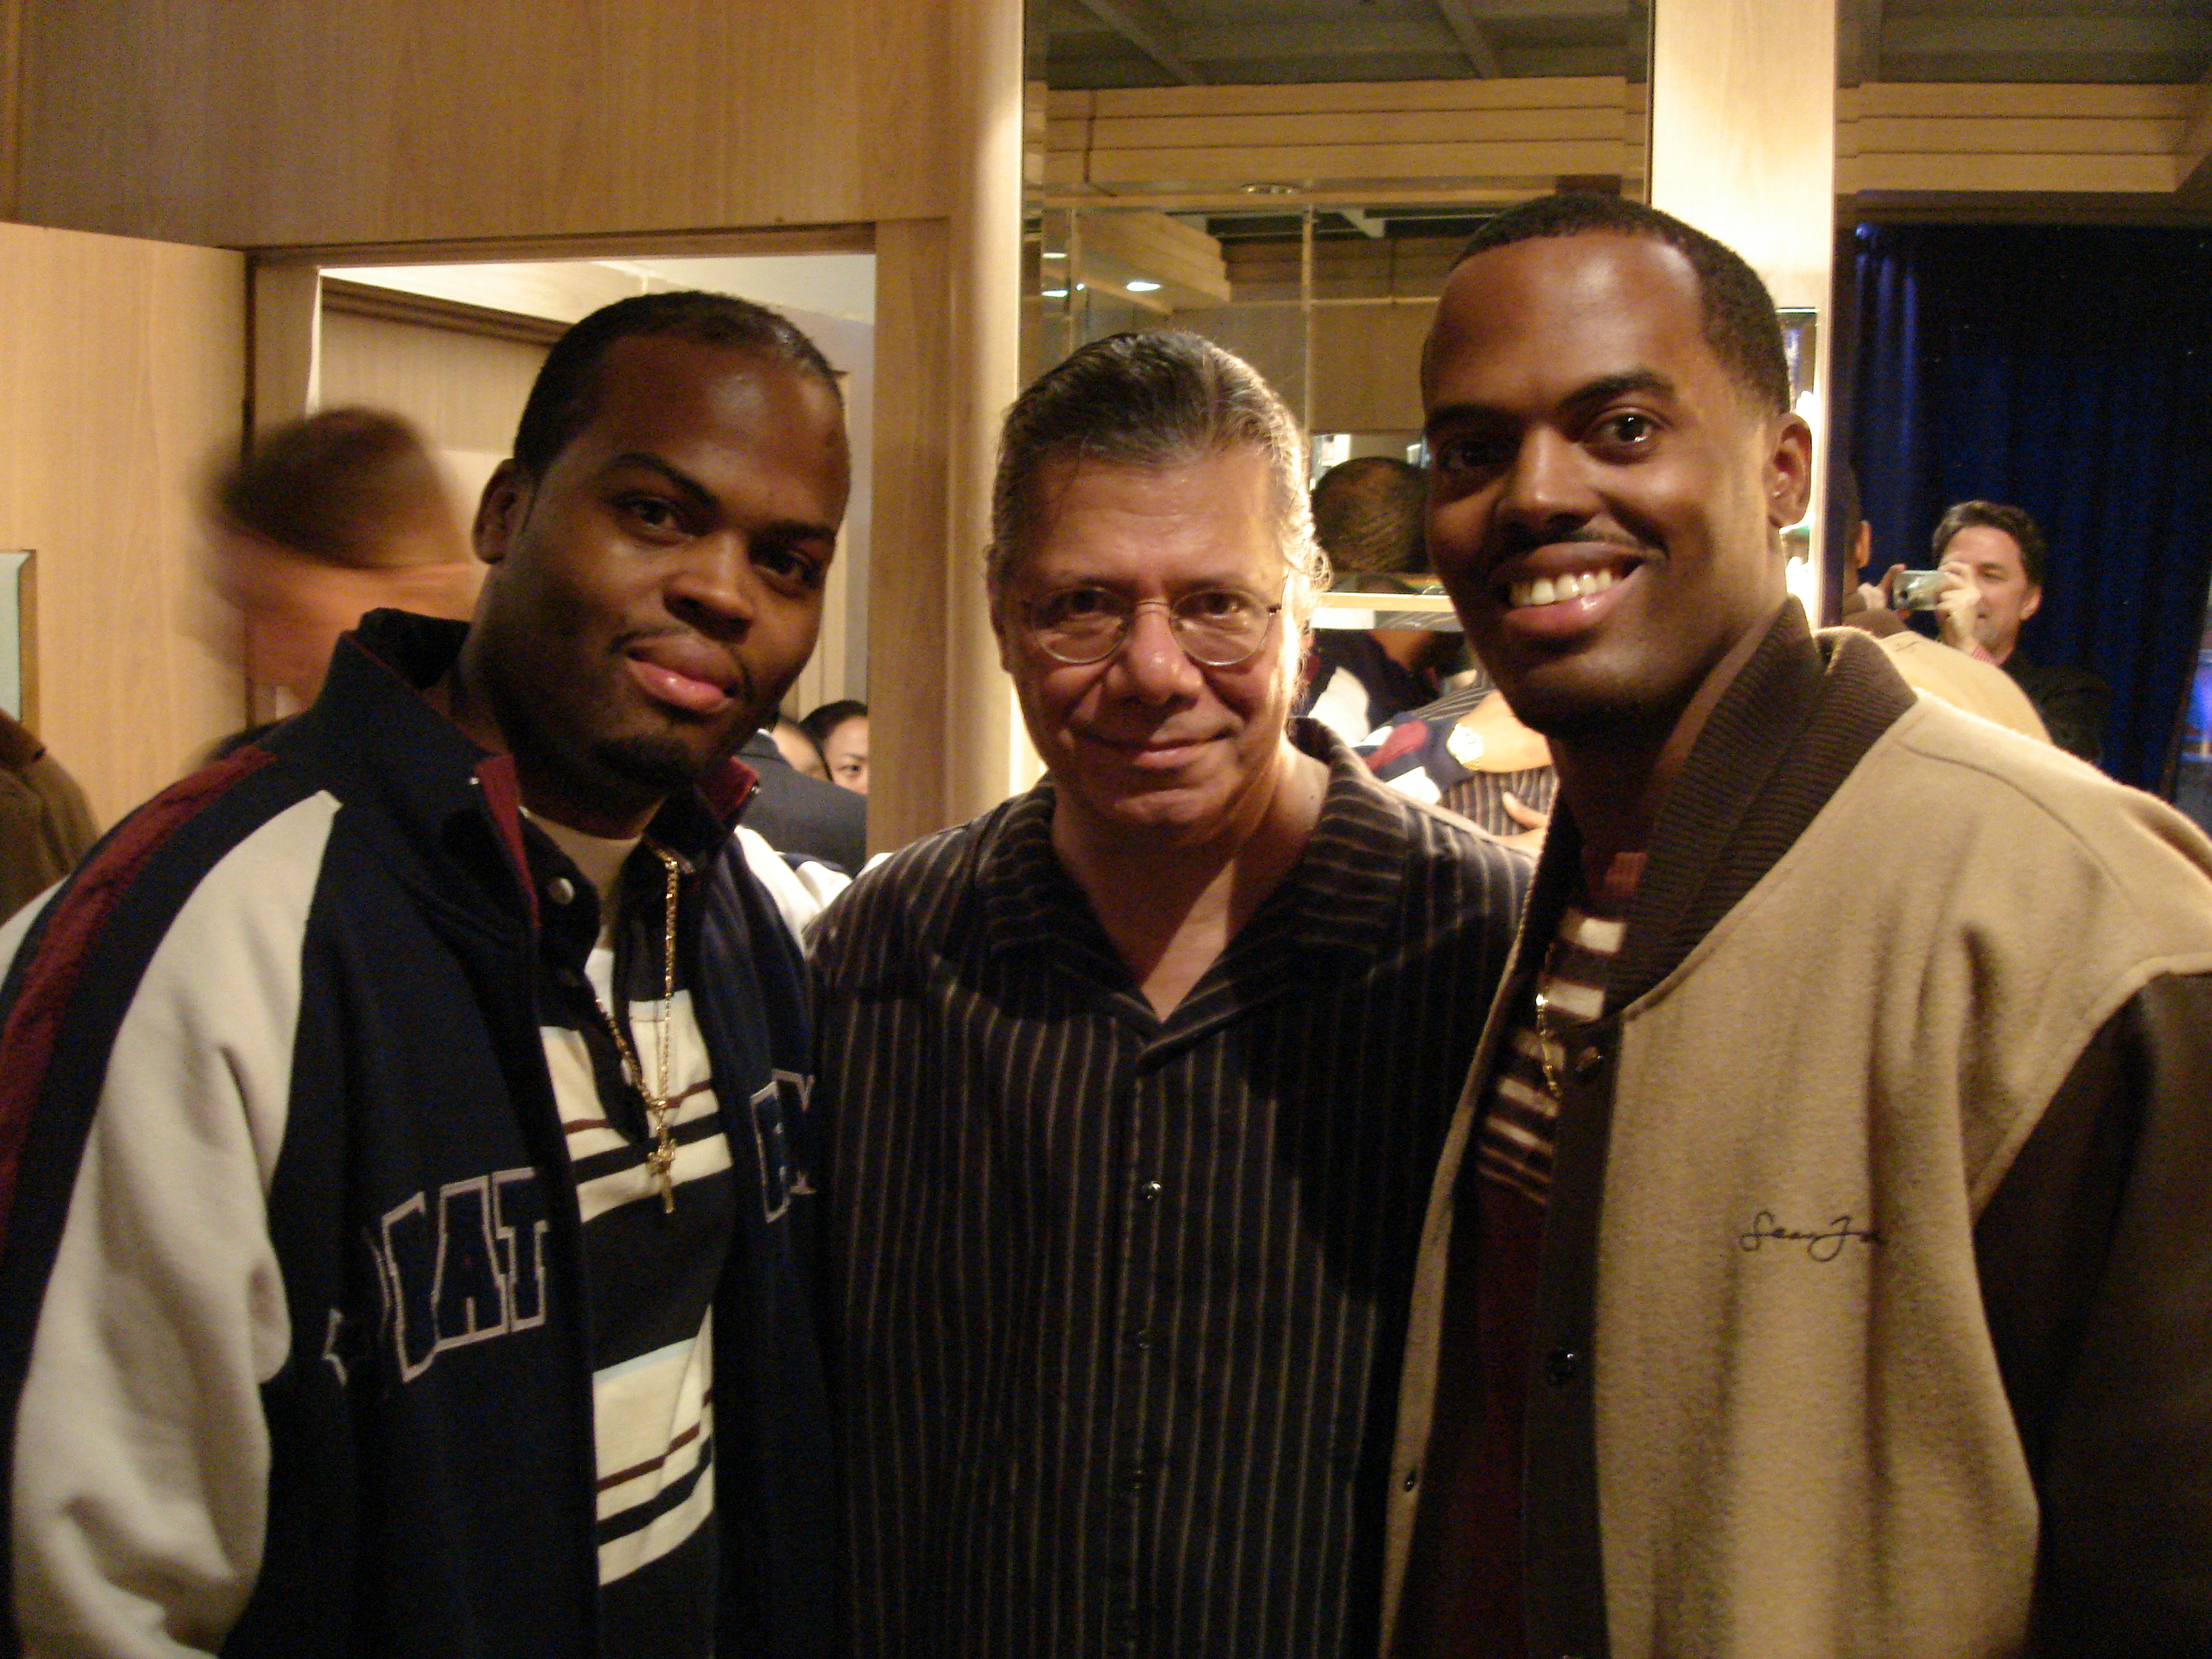 Steve Pageot, Chick Corea, Ric'key Pageot at the Blue Note in NYC